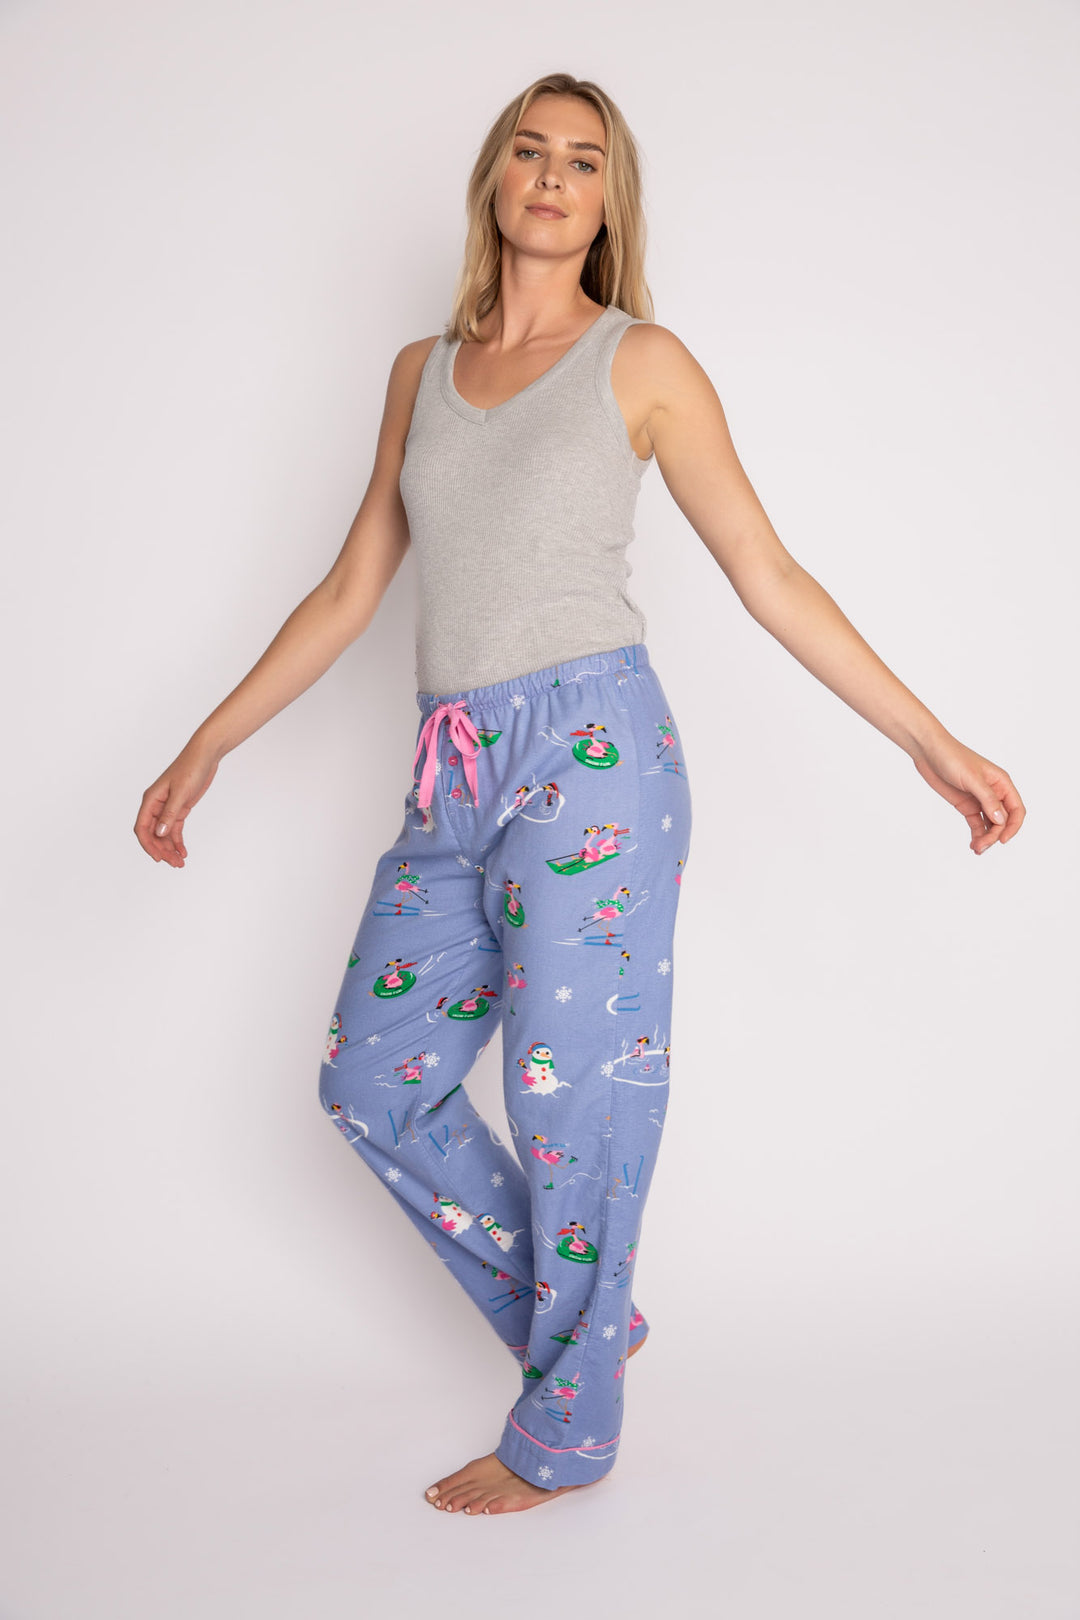 Peri flannel pajama pant in brushed cotton with pink flamingo & snowflake pattern. (7231869321316)